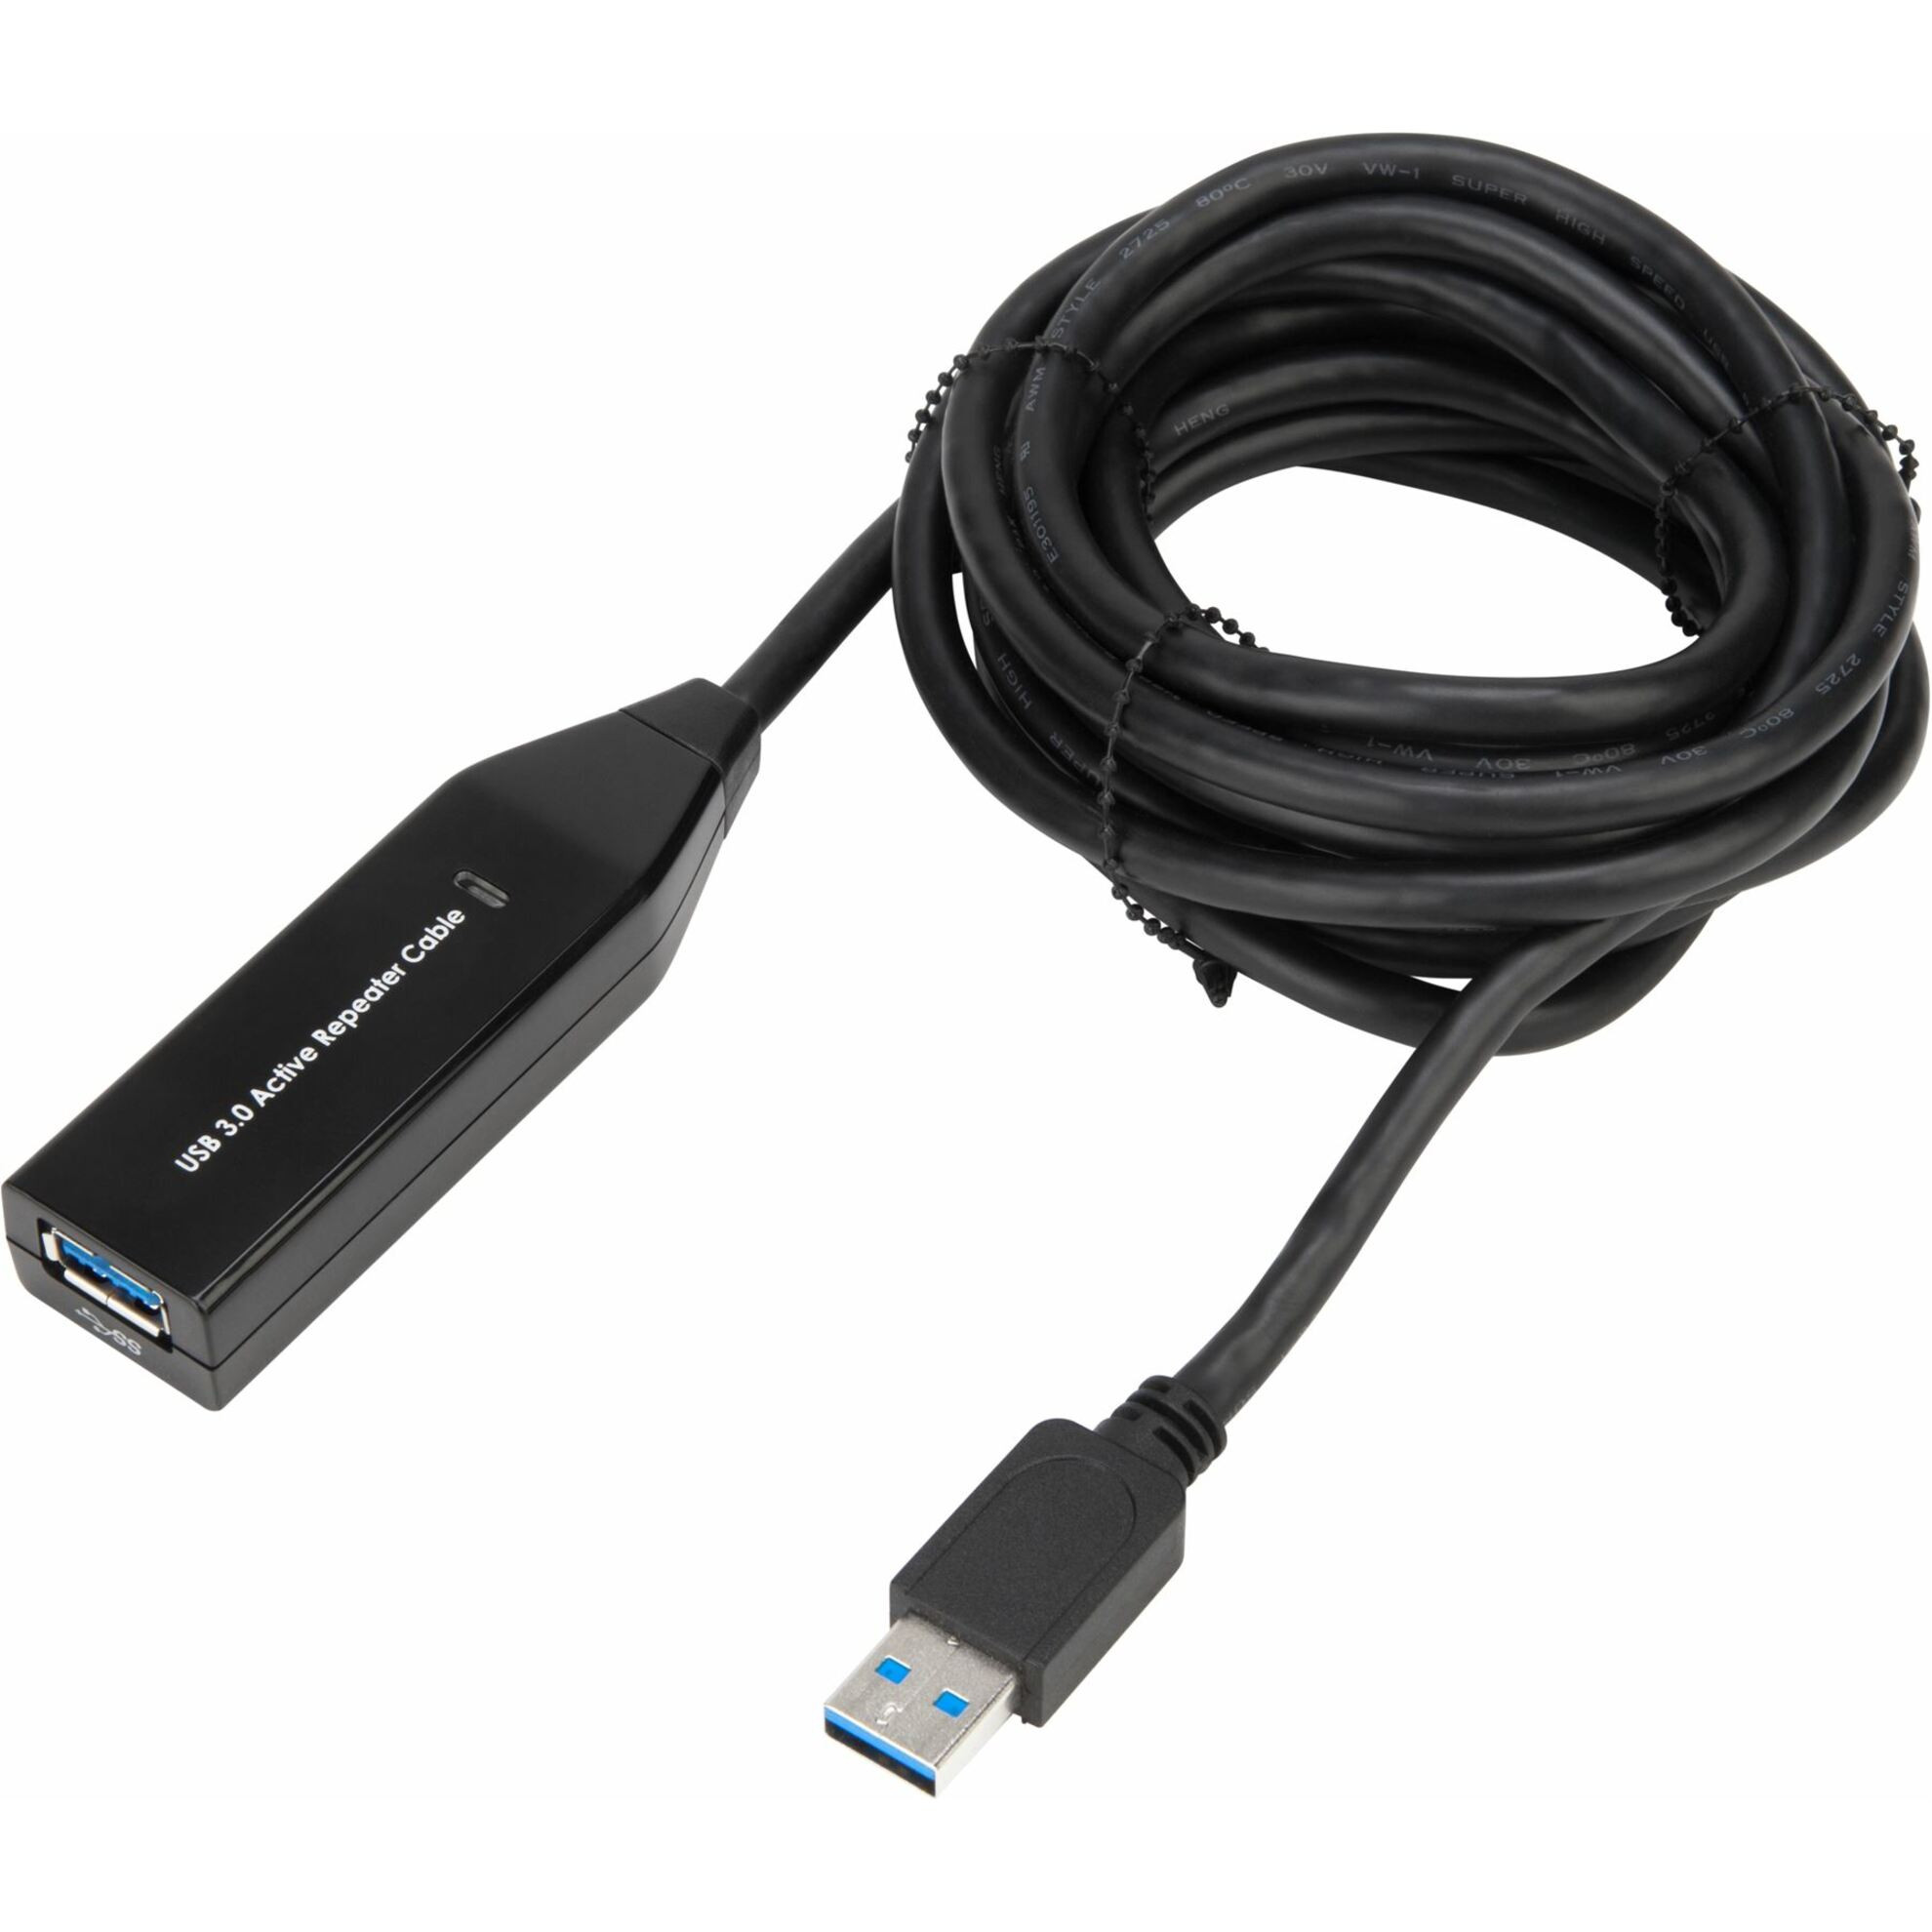 Targus USB Data Transfer Cable9.84 ft USB Data Transfer CableFirst End: USB 3.0Extension CableBlack ACC985USZ